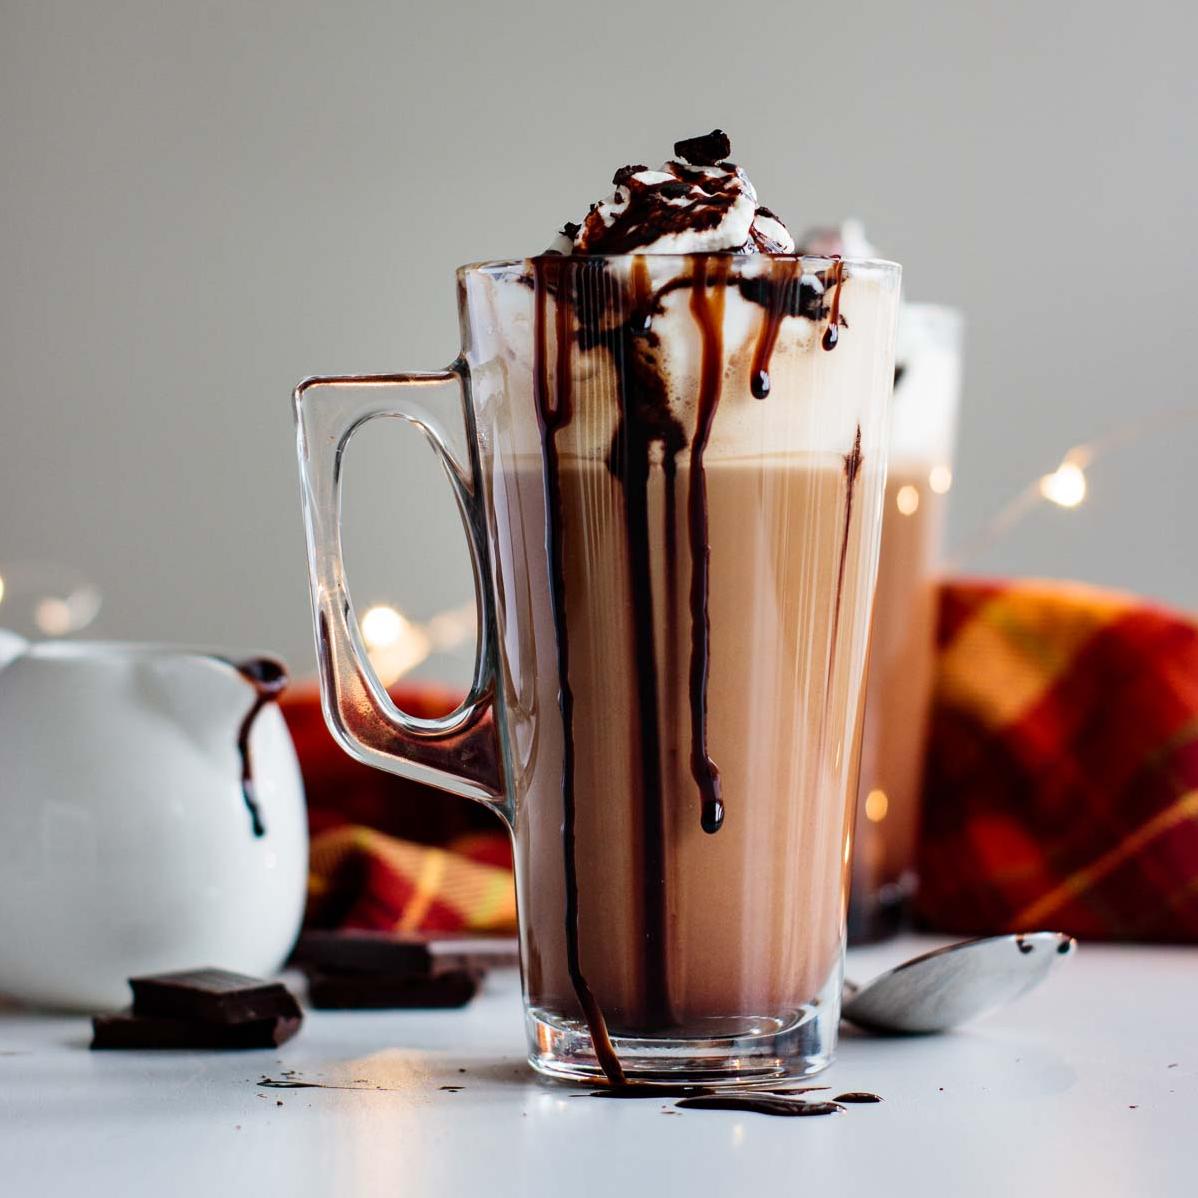  Satisfy your caffeine cravings with this irresistible recipe.